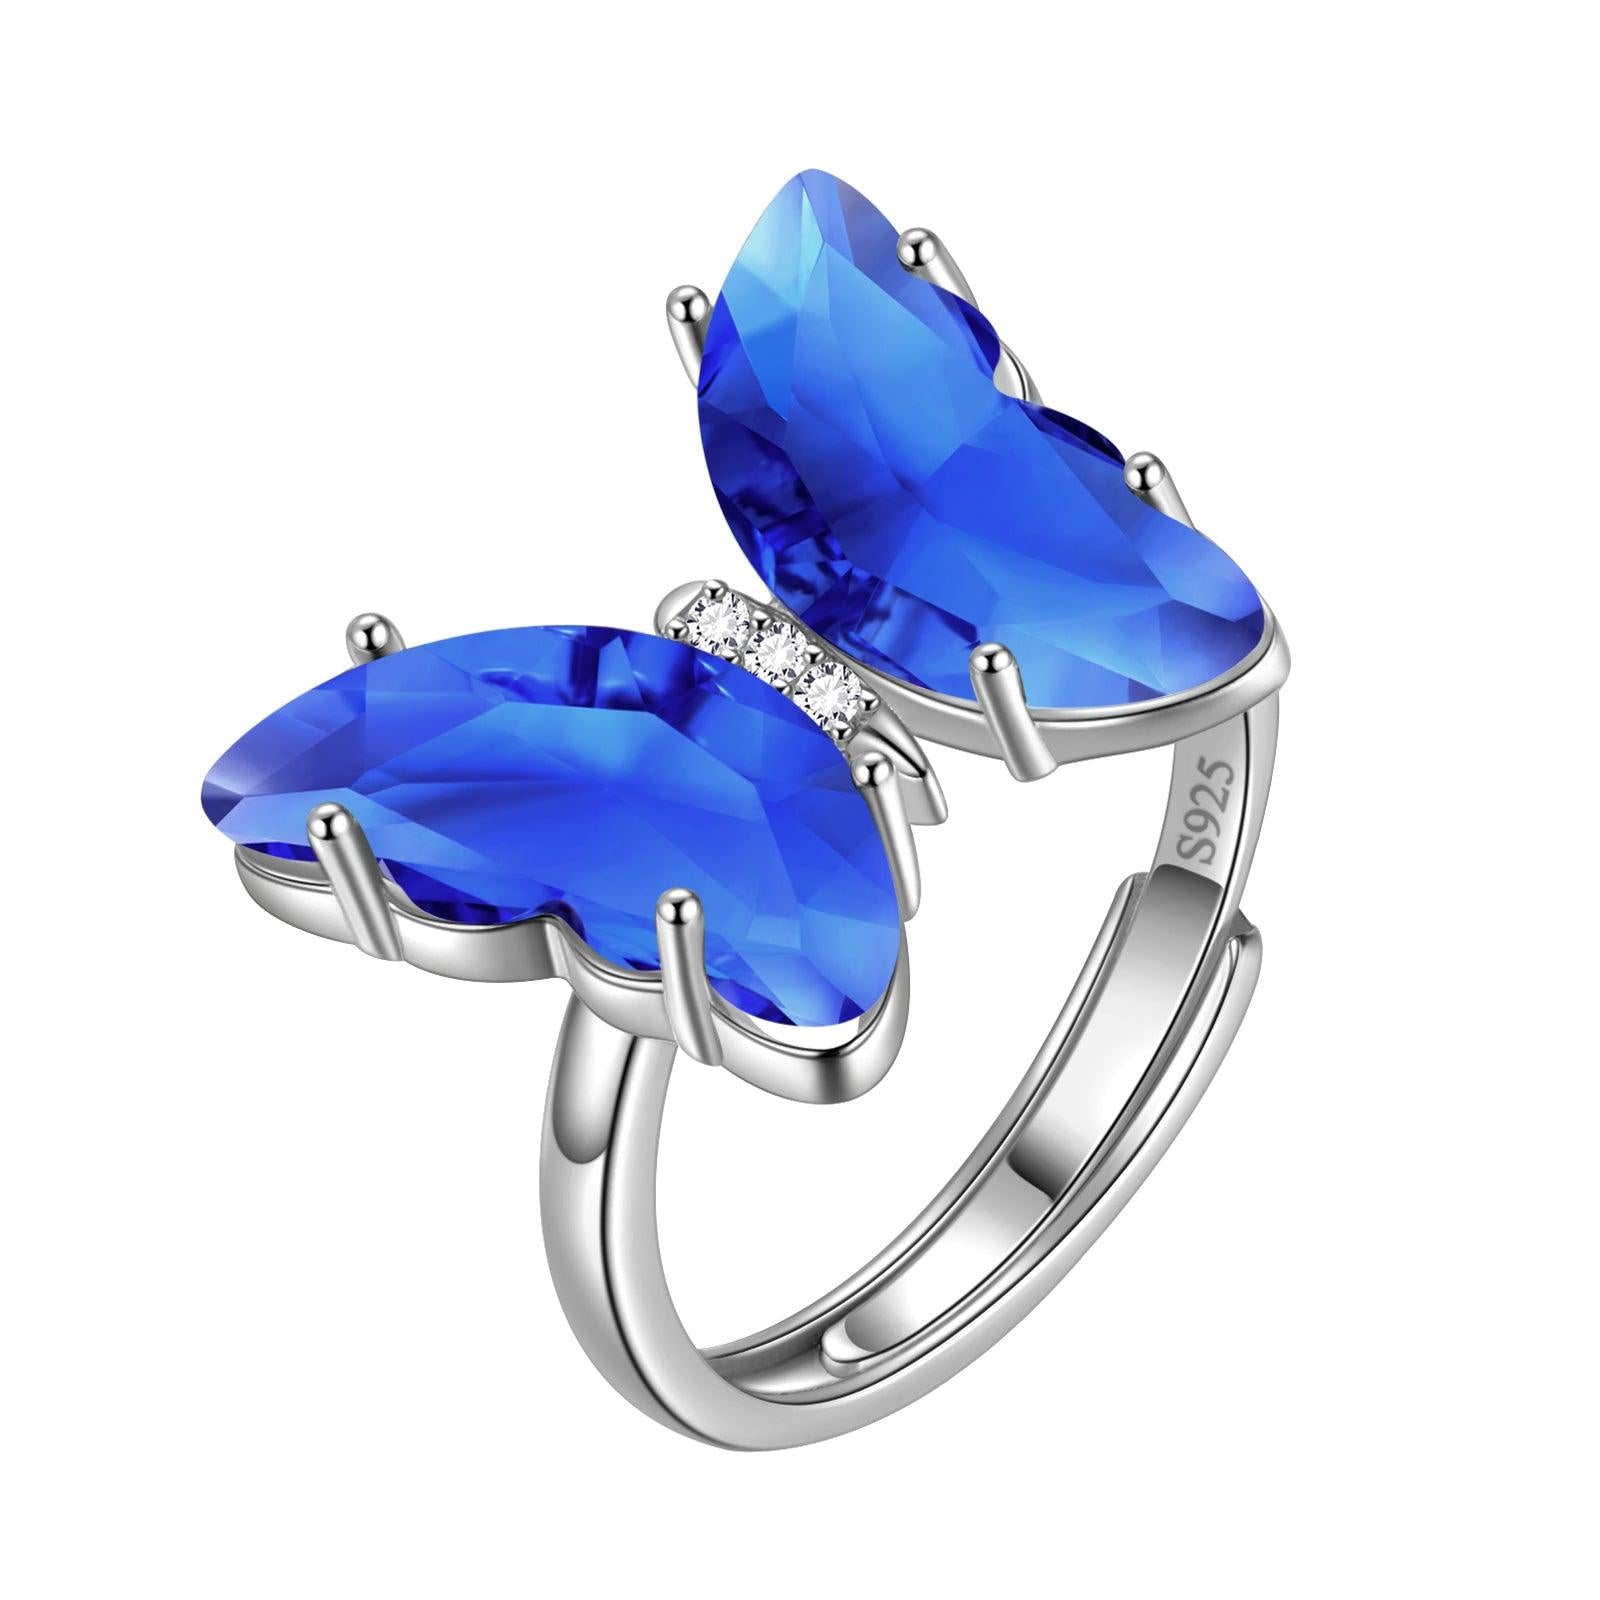 925 Sterling Silver Butterfly Ring Birthstone Crystal Women Jewelry Gifts - Aurora Tears